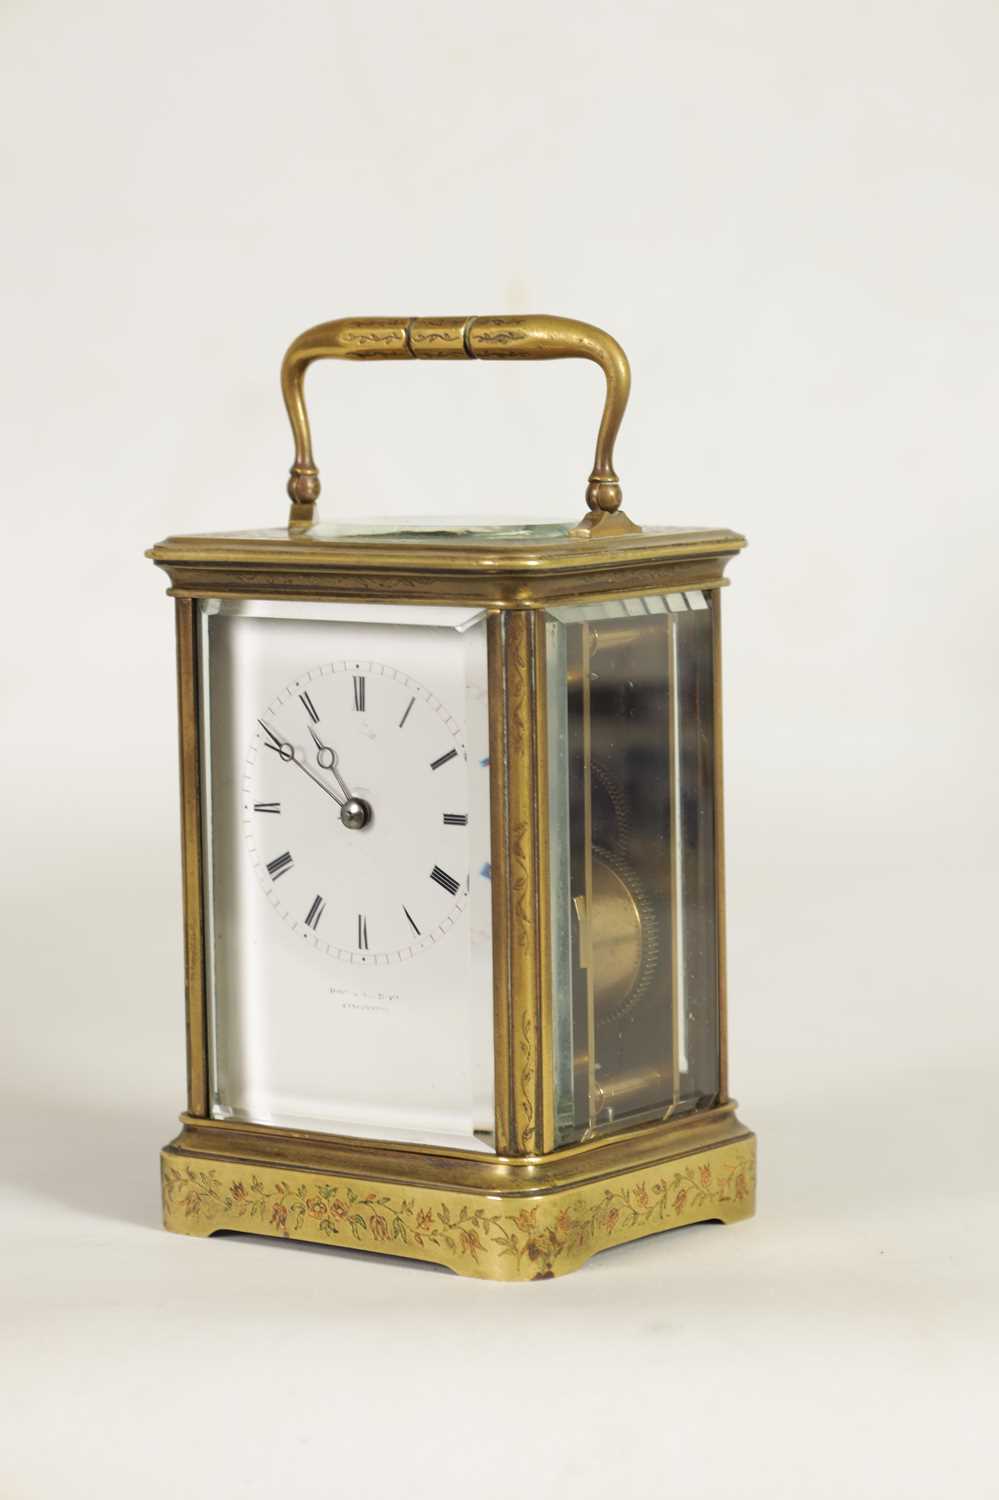 JAPY FRERES. A LATE 19TH CENTURY FRENCH ENGRAVED STRIKING CARRIAGE CLOCK - Image 3 of 13